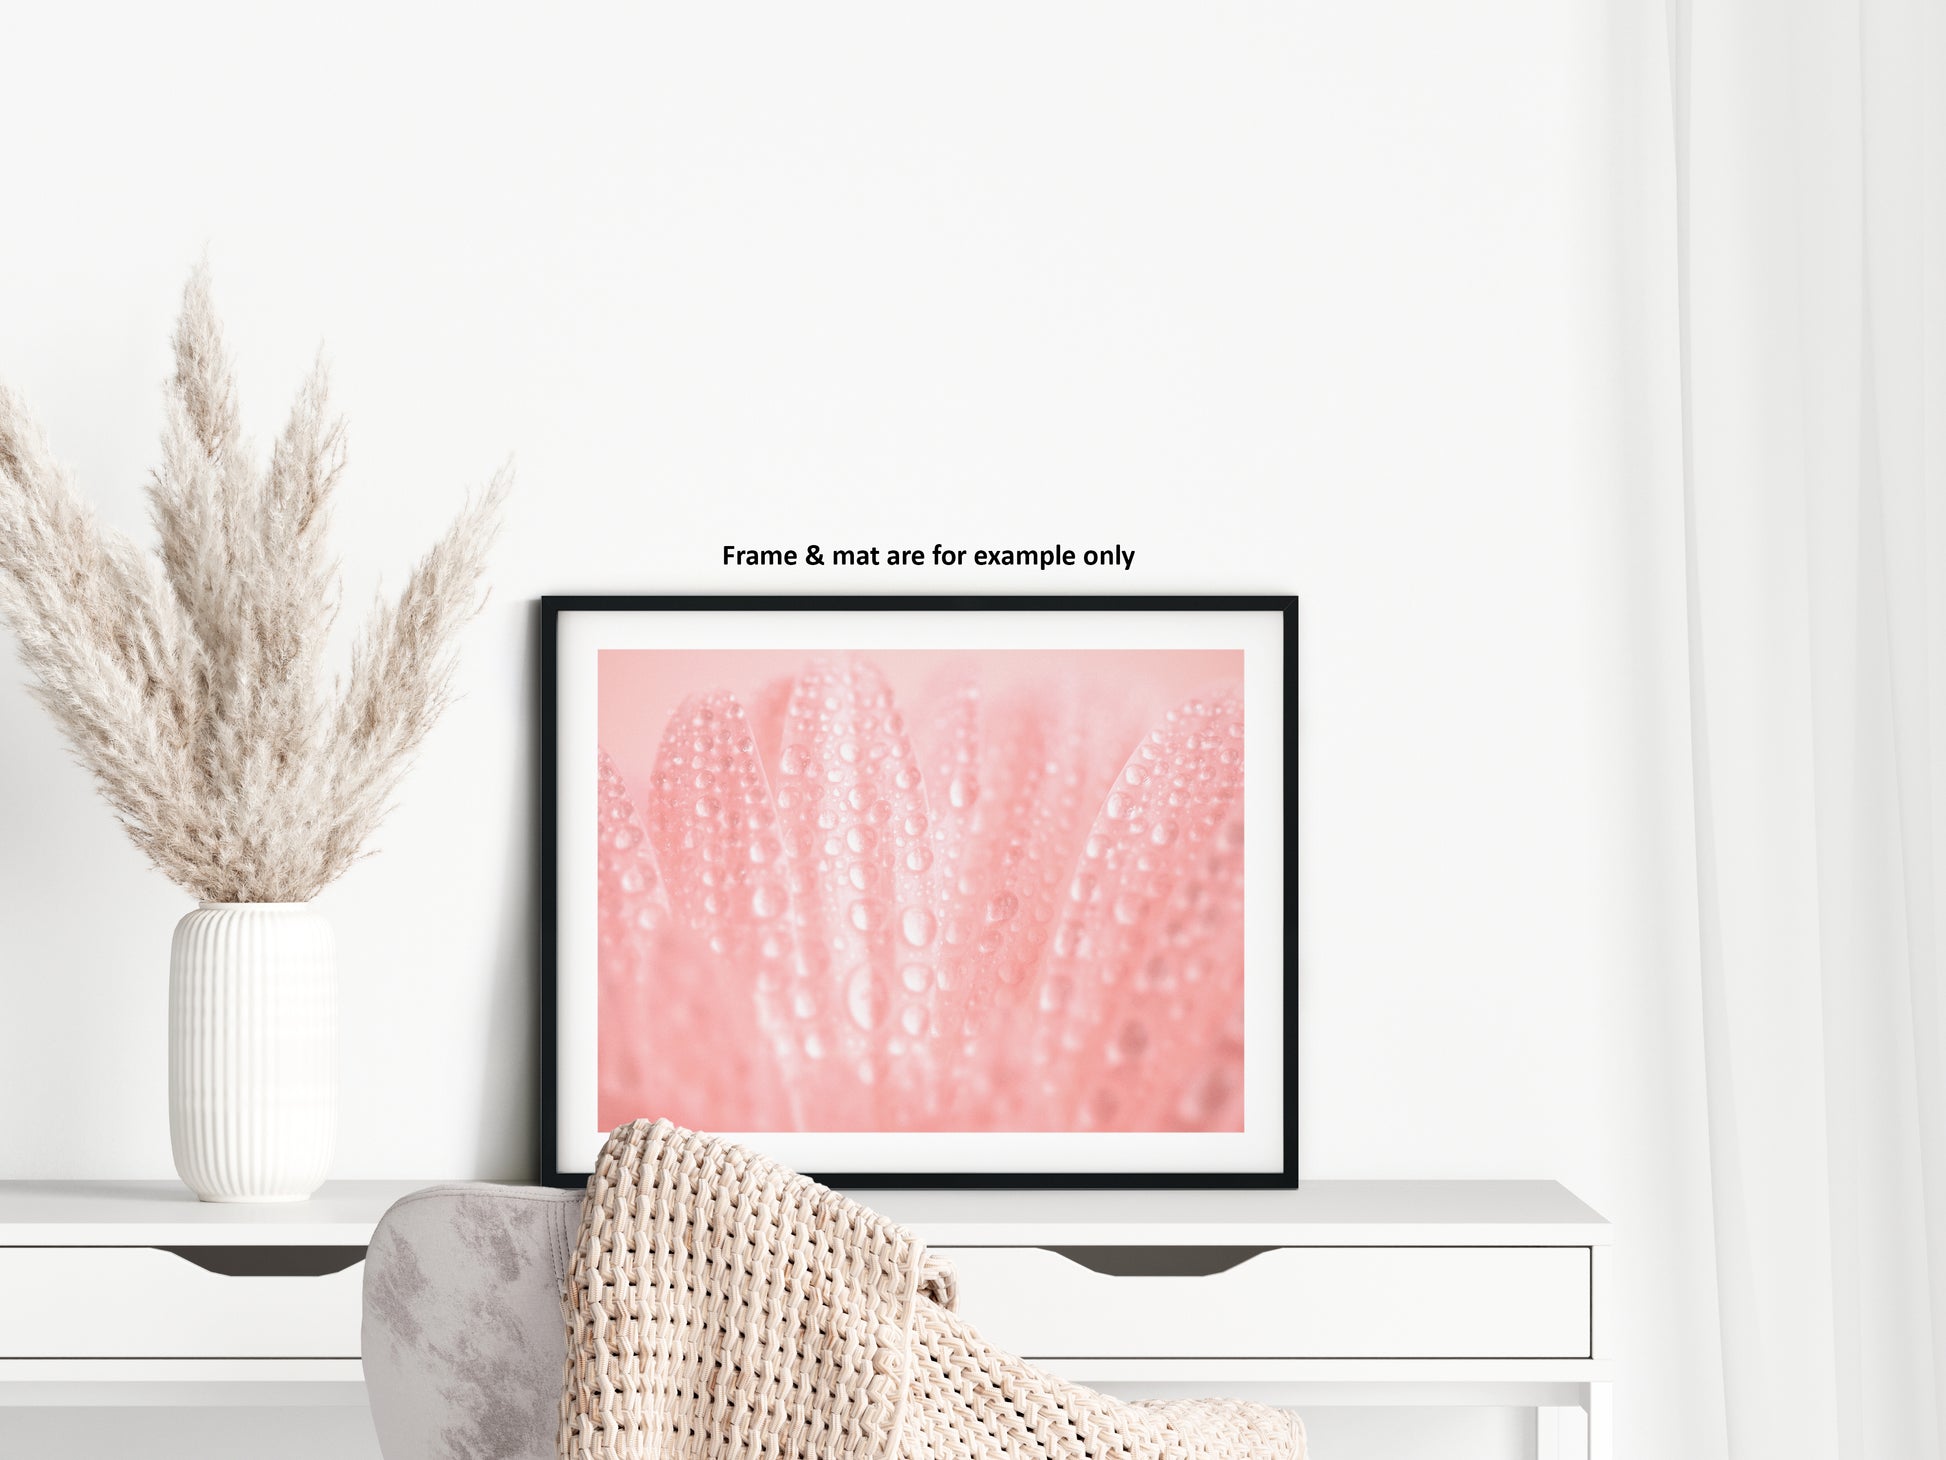 Art Prints For Hallway: Serenity Close-up Pink Daisy Floral Botanical Photograph Shabby Chic - Vintage Loose / Unframed Wall Art print